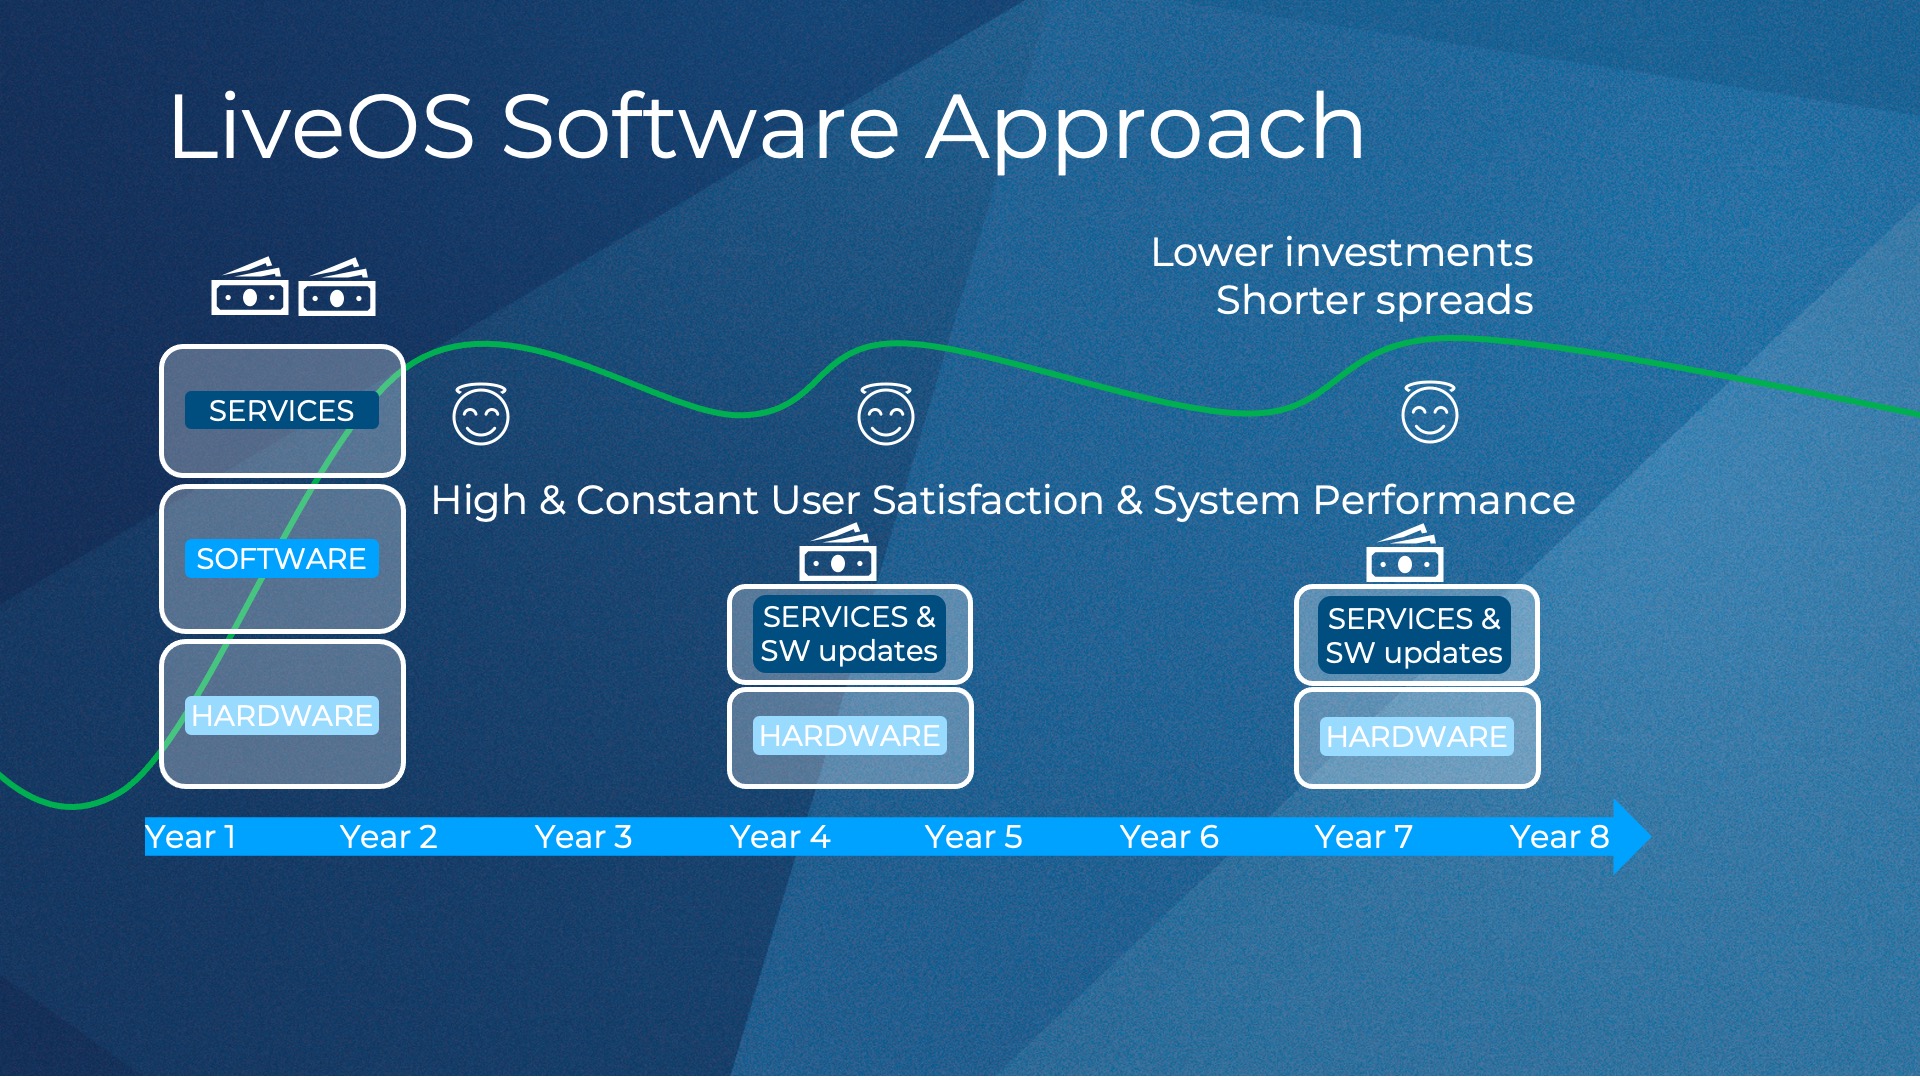 LiveOS Software Approach